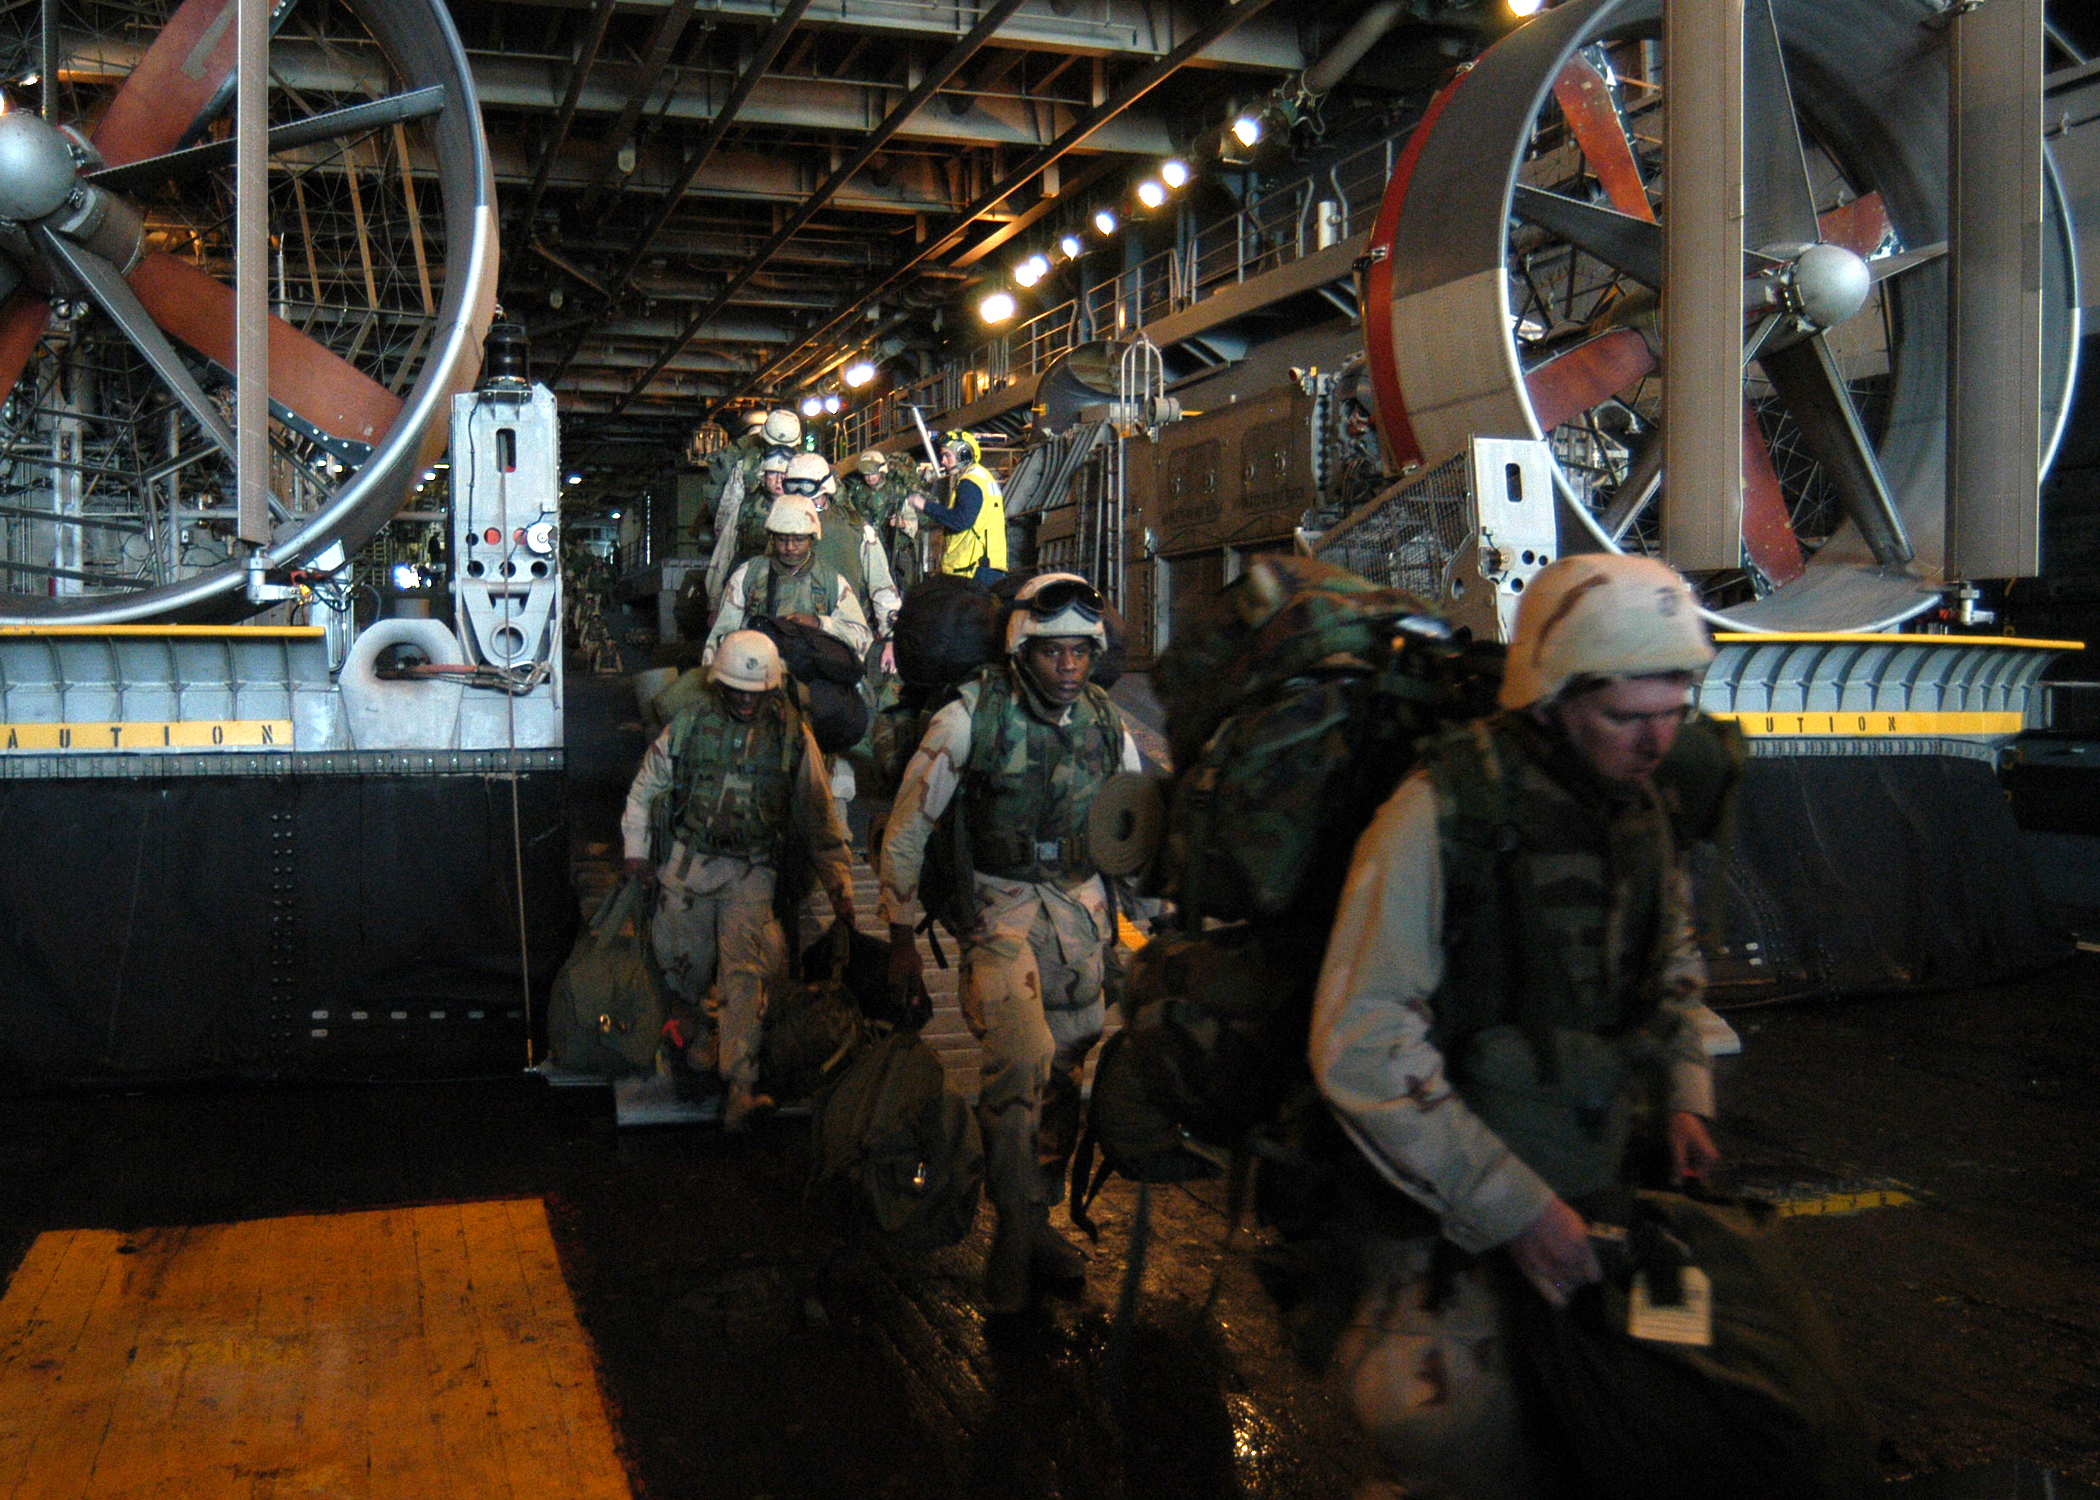 US_Navy_030217-N-2972R-007_In_the_well_deck_aboard_the_amphibious_assault_ship_USS_Kearsarge_(LHD_3),_Marines_assigned_to_the_2d_Marine_Expeditionary_Brigade_(2d_MEB)_embark_Assault_Craft_Unit_4_(ACU-4)_Hopper_68.jpg